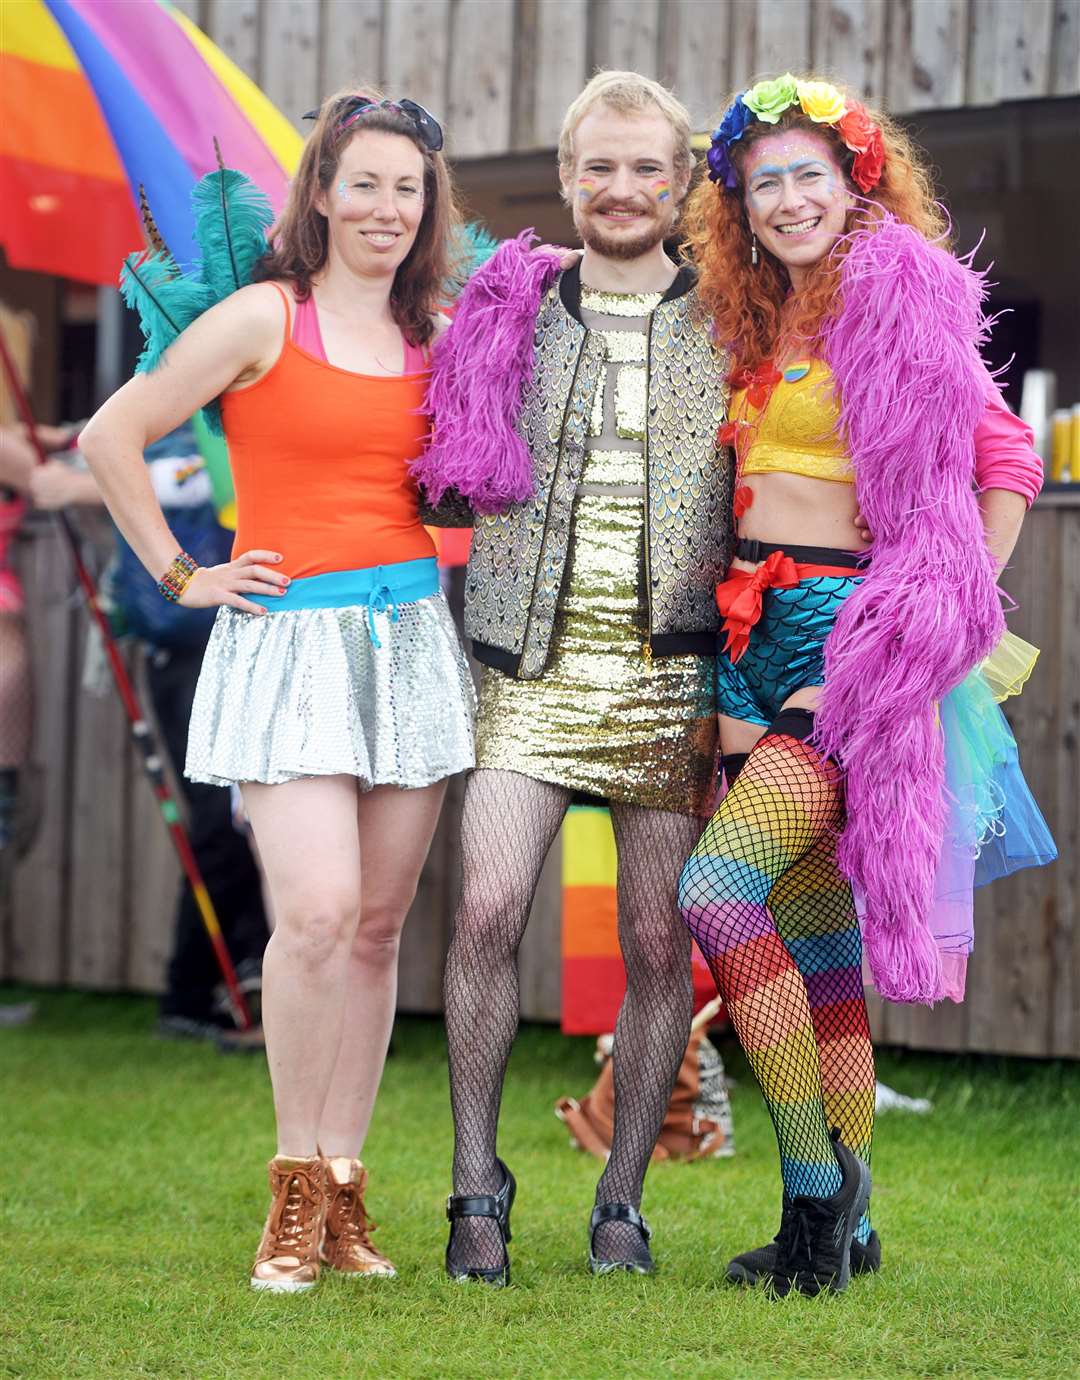 Kirsty D'Ambrosio, David Jones and Adriana Klick dressed for Proud Ness 2019.Picture: Gair Fraser